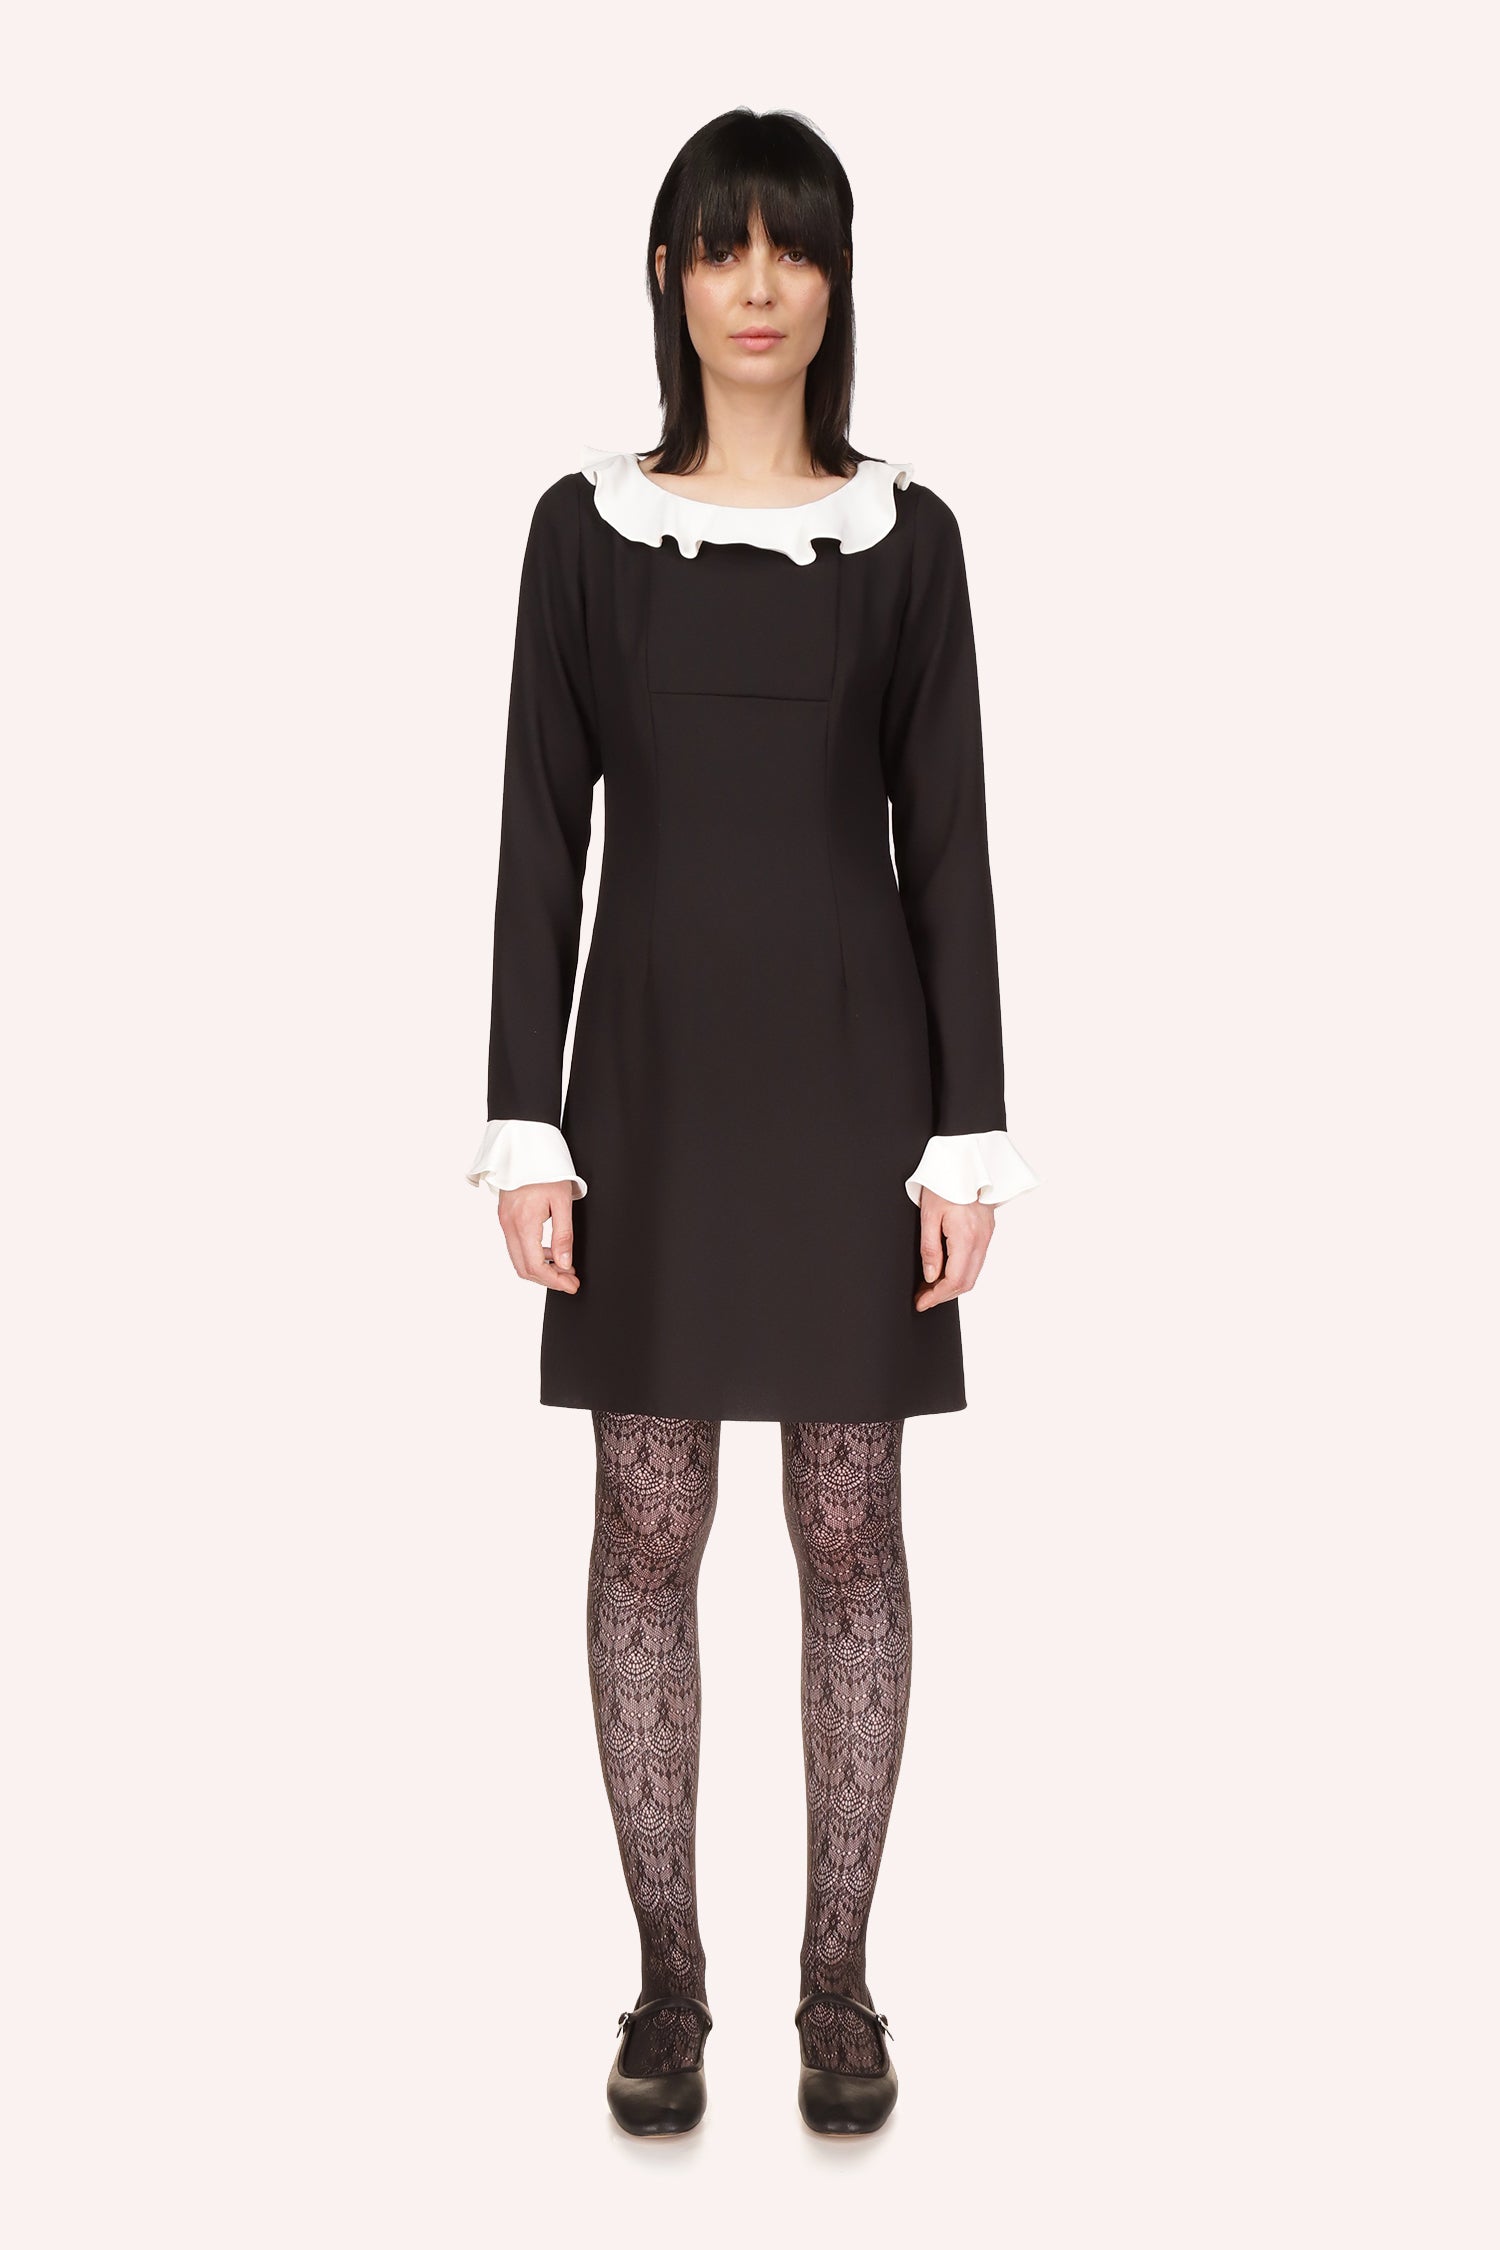 Combo Crepe Dress is above-the-knee dress, with the vanilla crepe on the long sleeves and collar borders